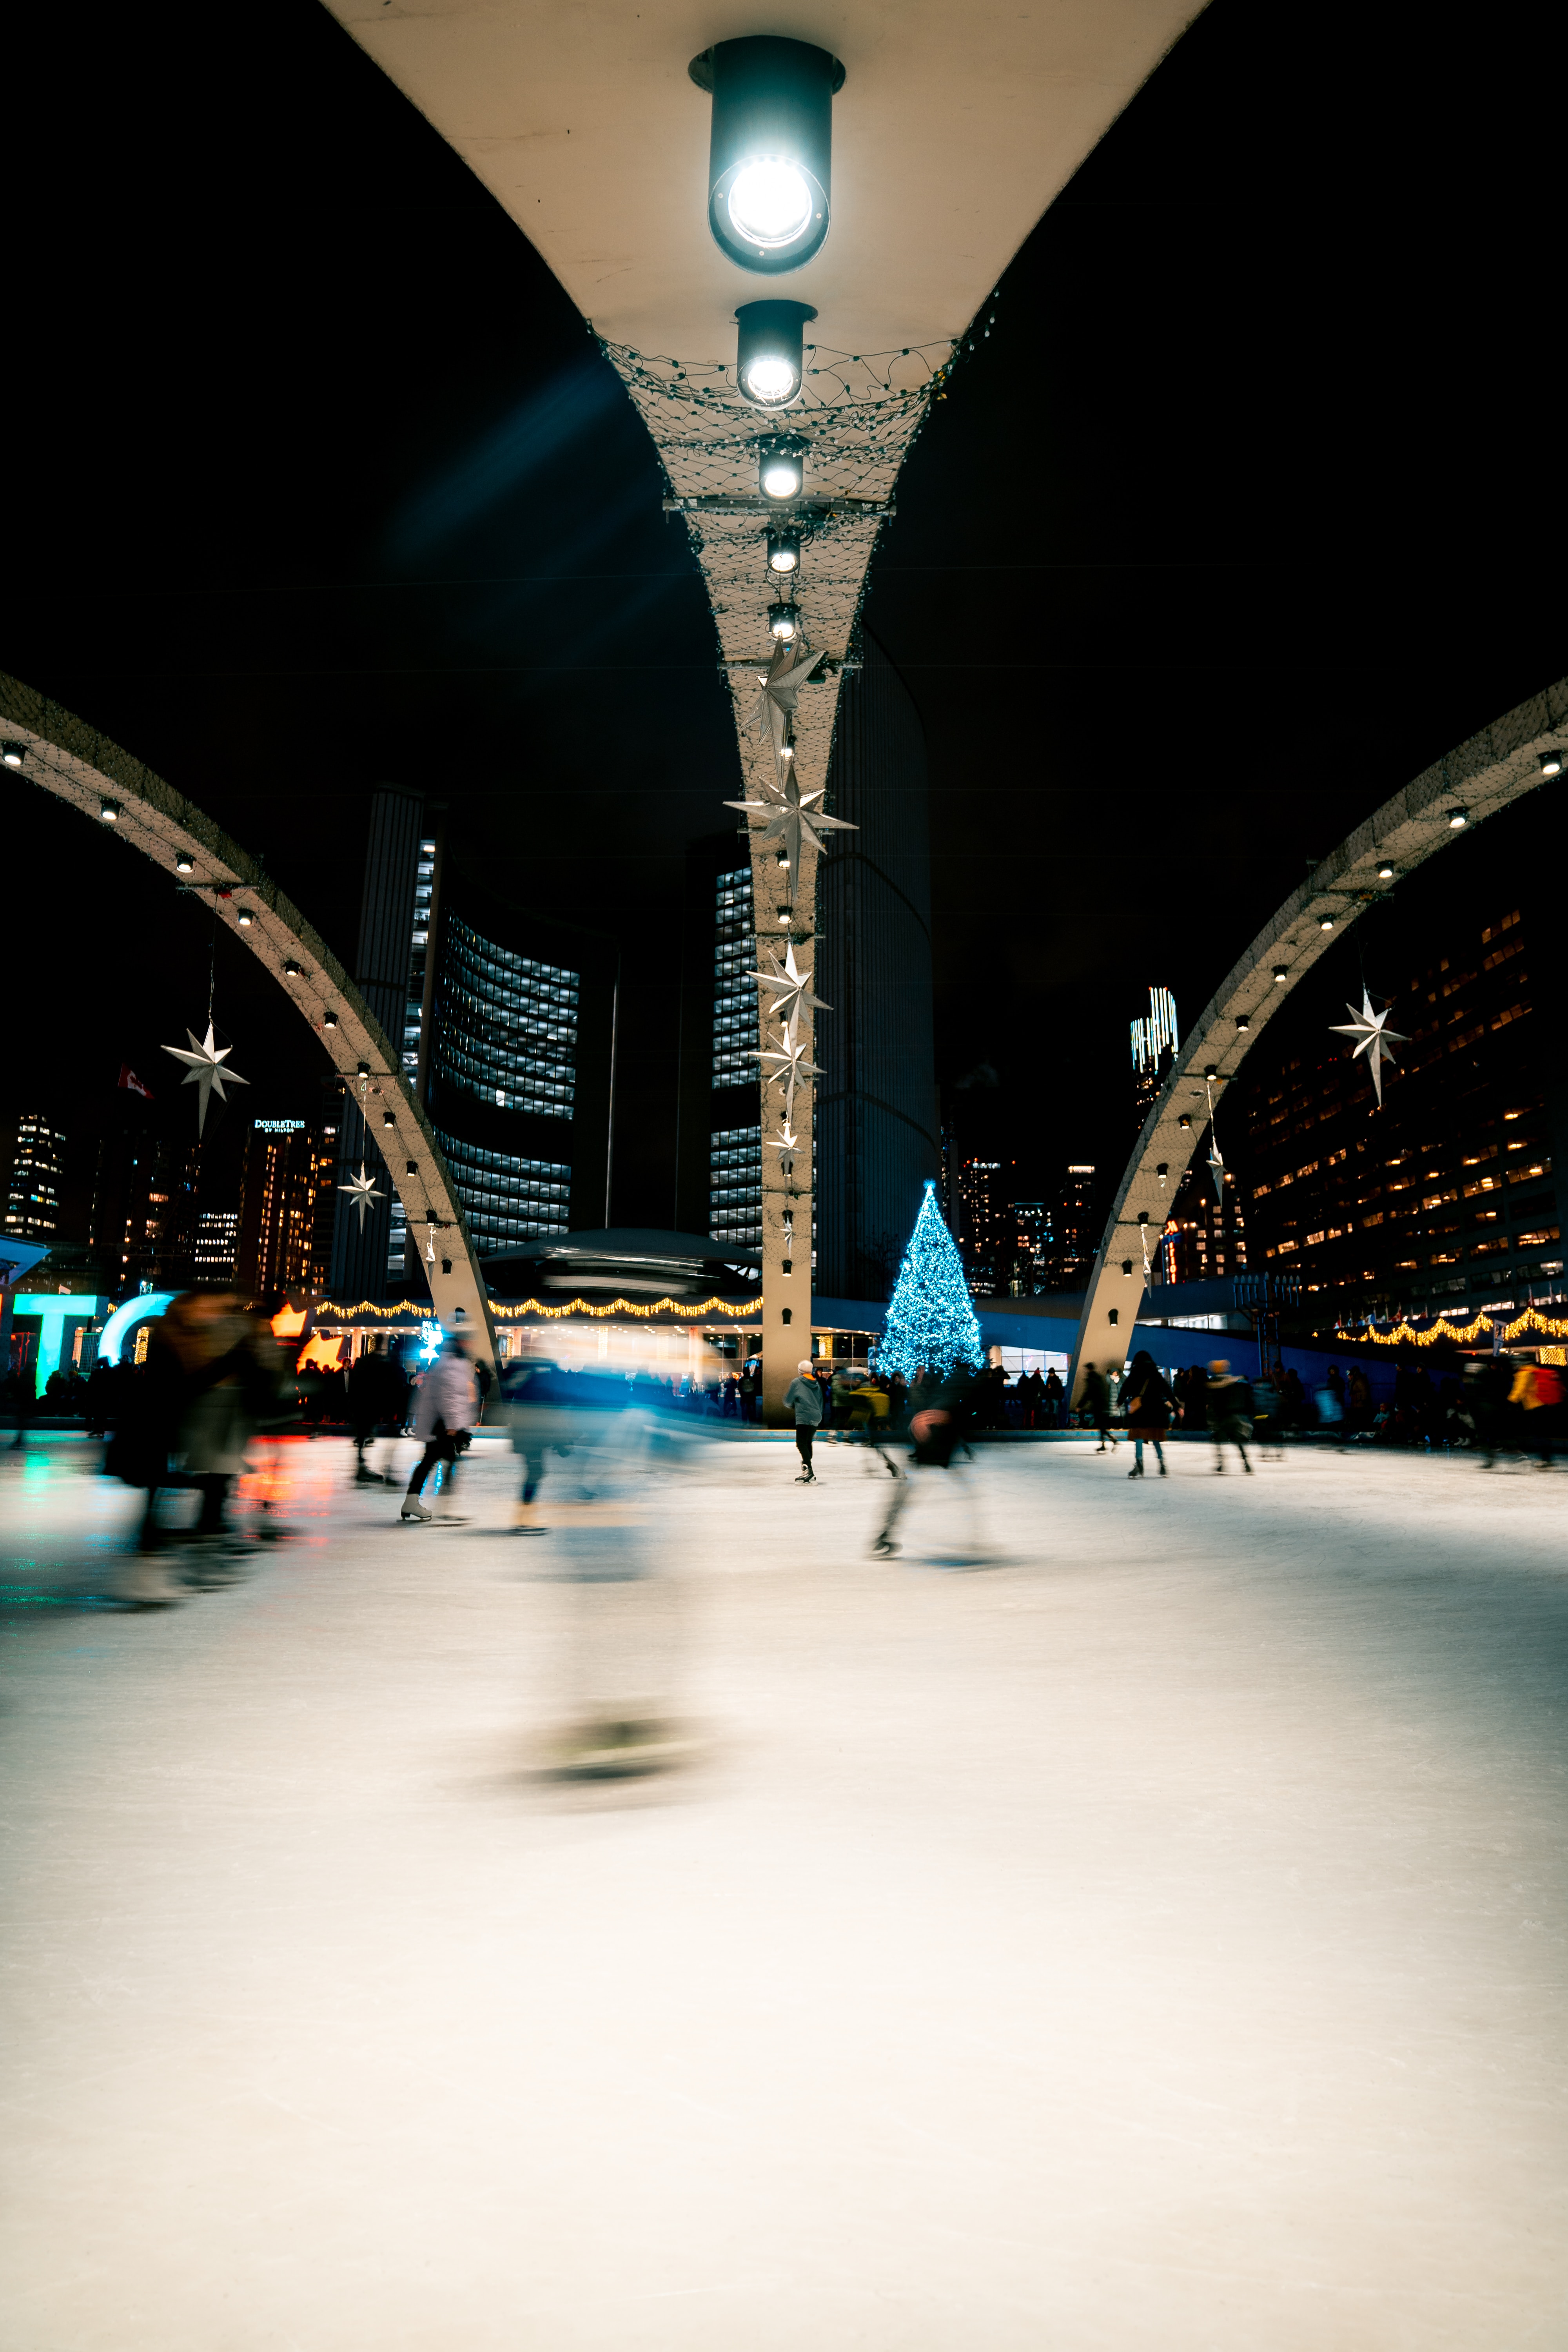 people, miscellanea, miscellaneous, blur, smooth, long exposure, rink QHD